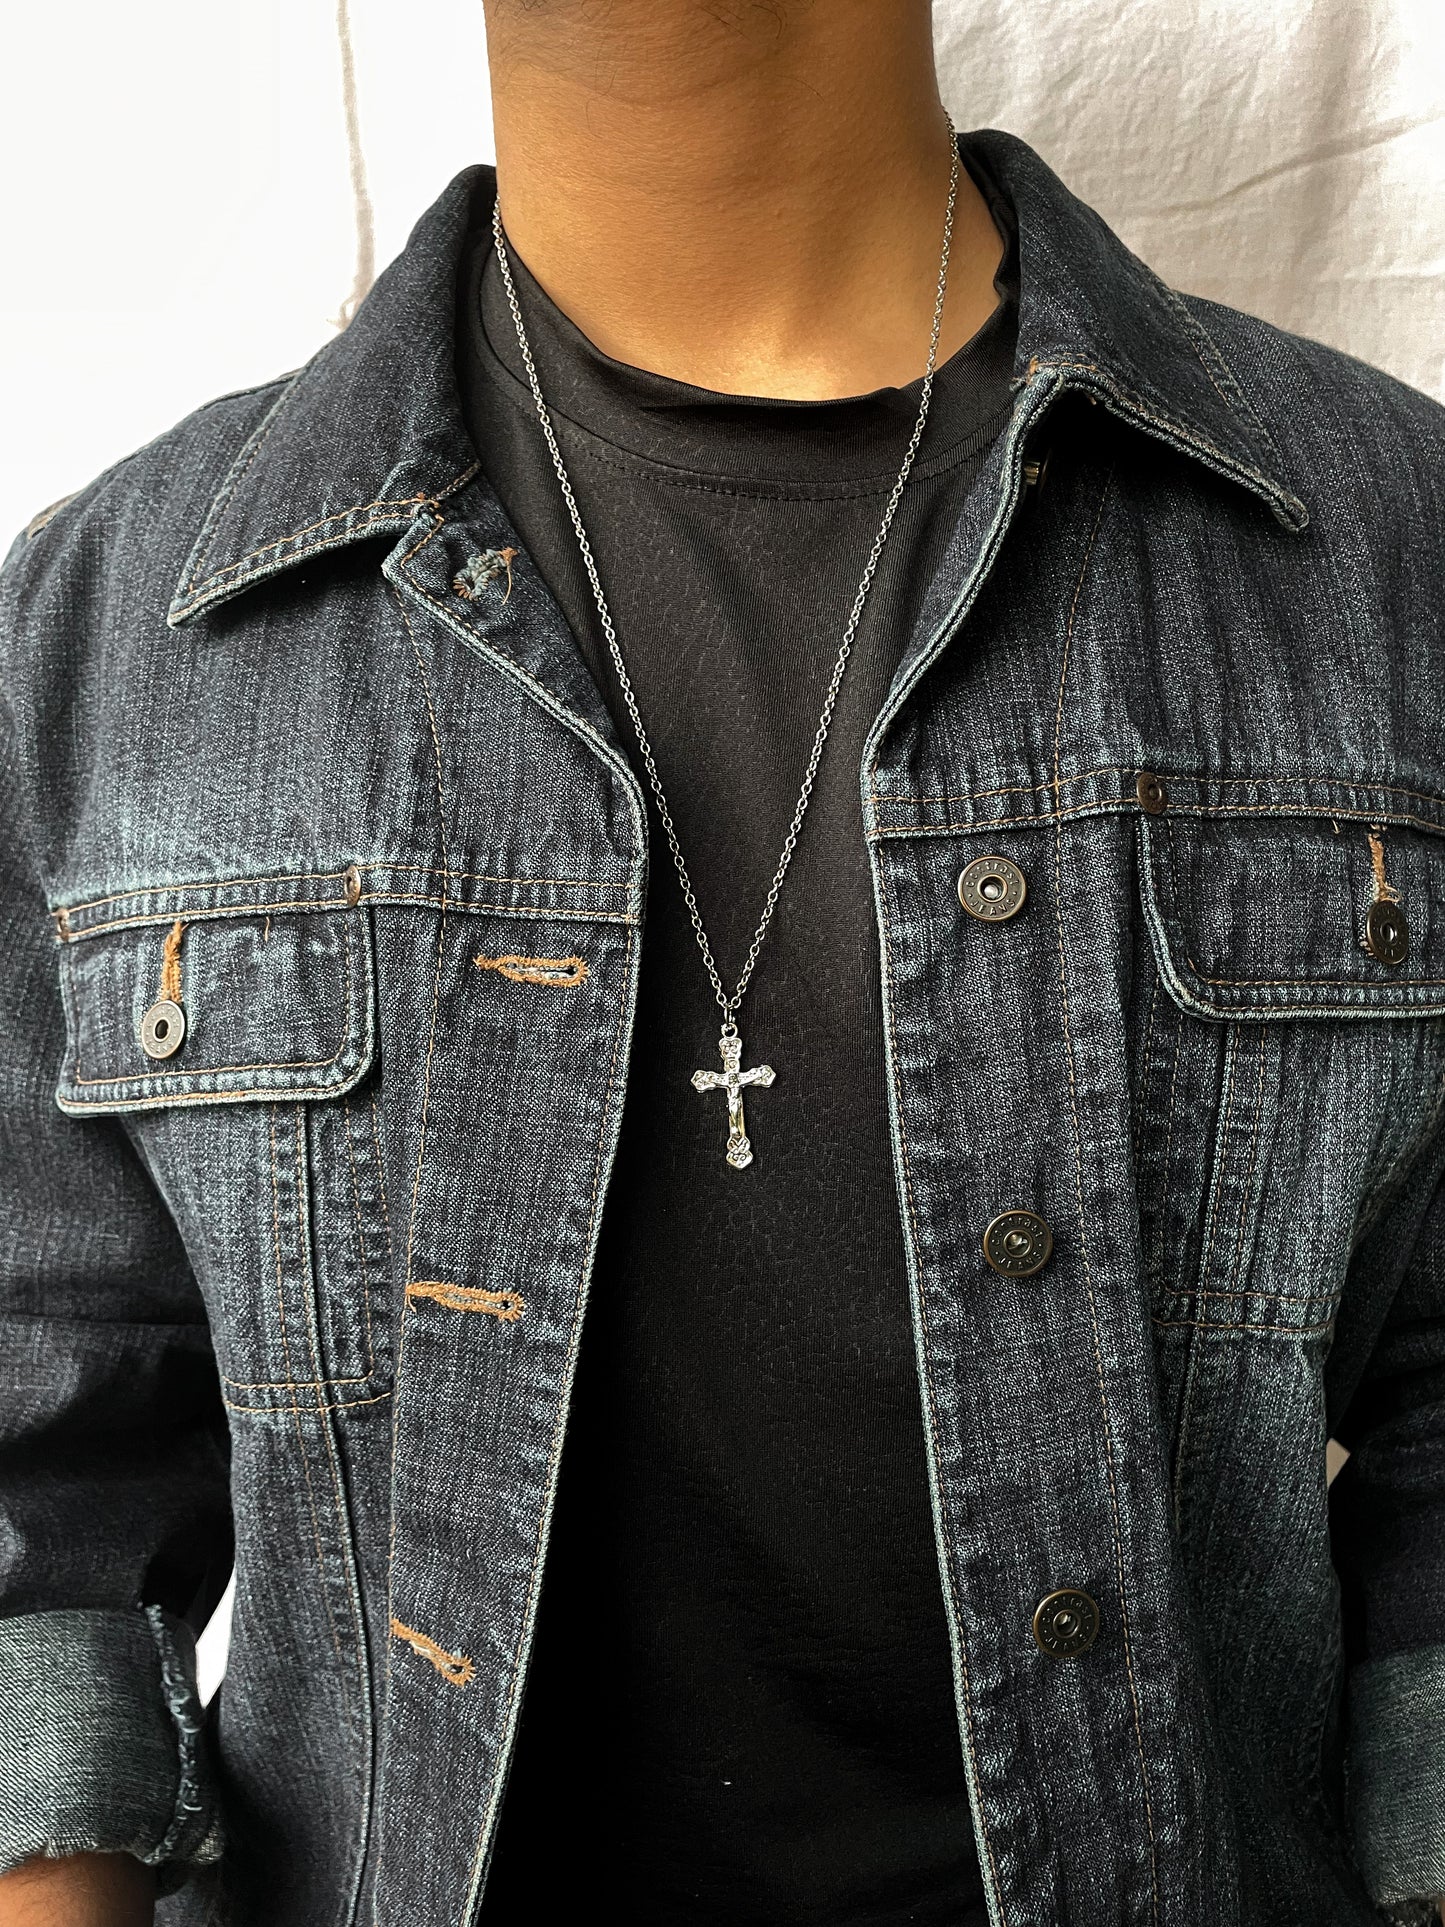 Thin Silver Cross Pendant With Chain